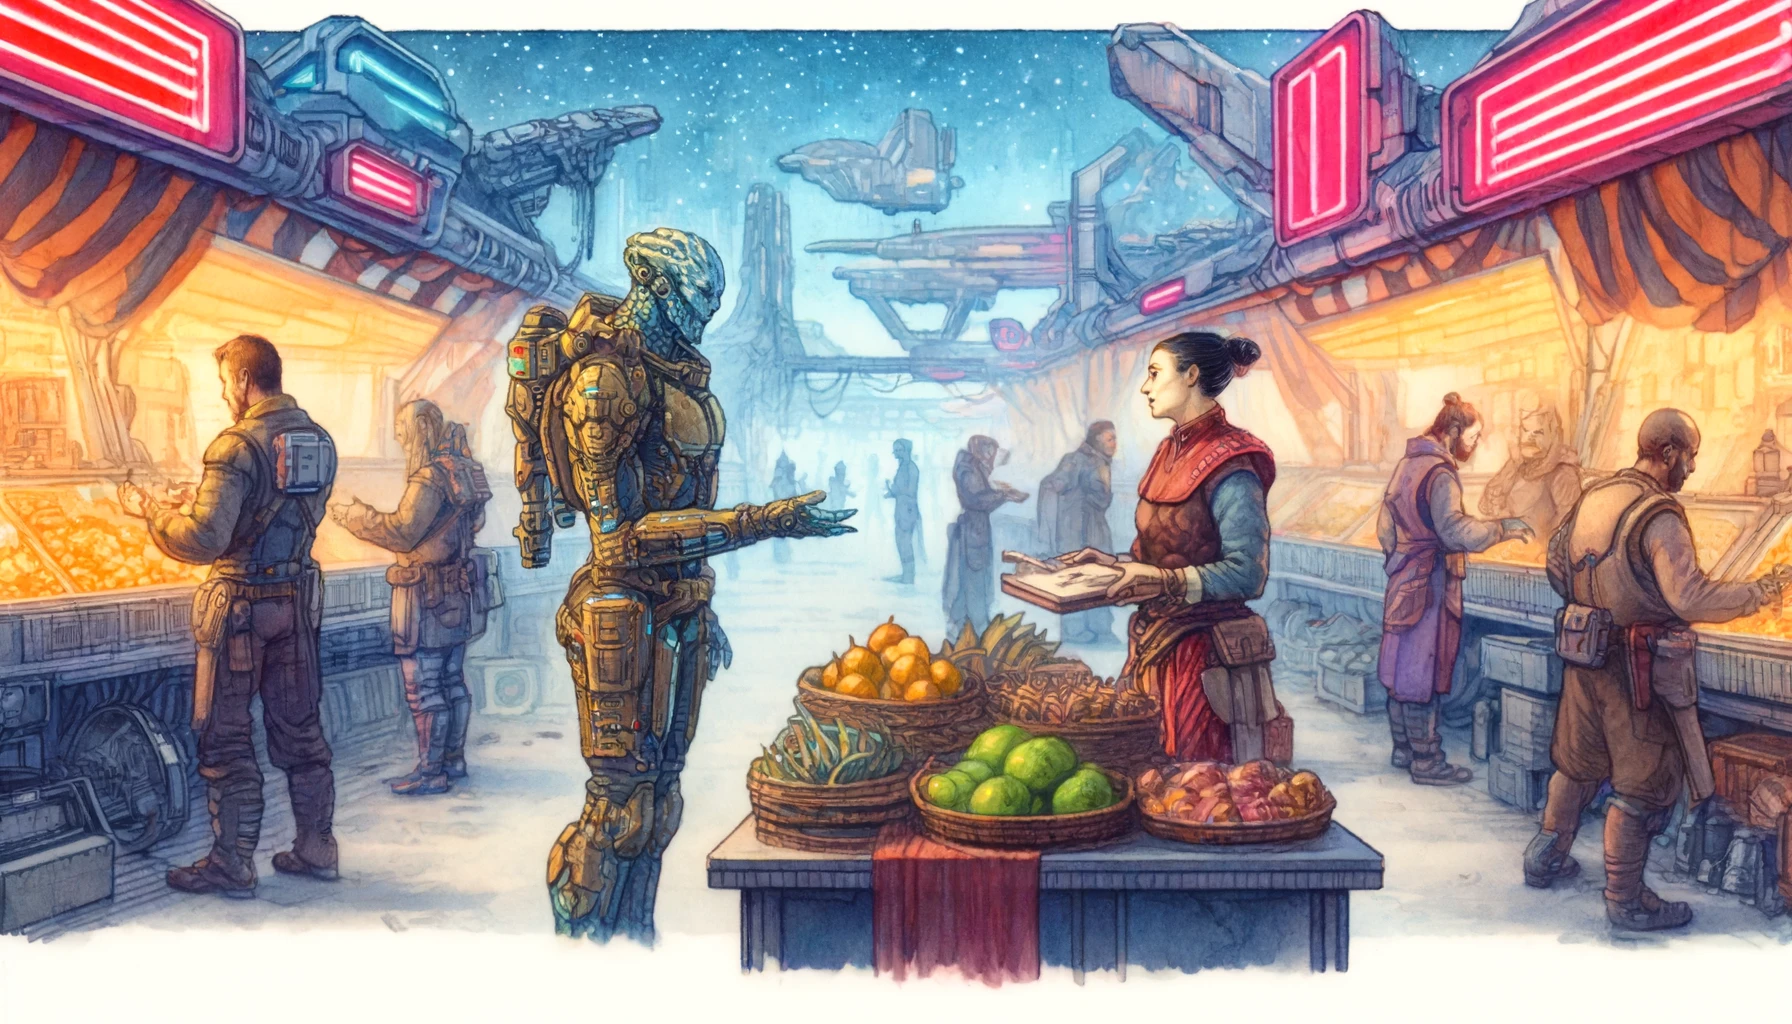 This vibrant scene depicts two spacefarers in a bustling galactic outpost marketplace, with one character negotiating with an alien merchant. The background features neon signs and various stalls, creating a lively yet organized atmosphere.